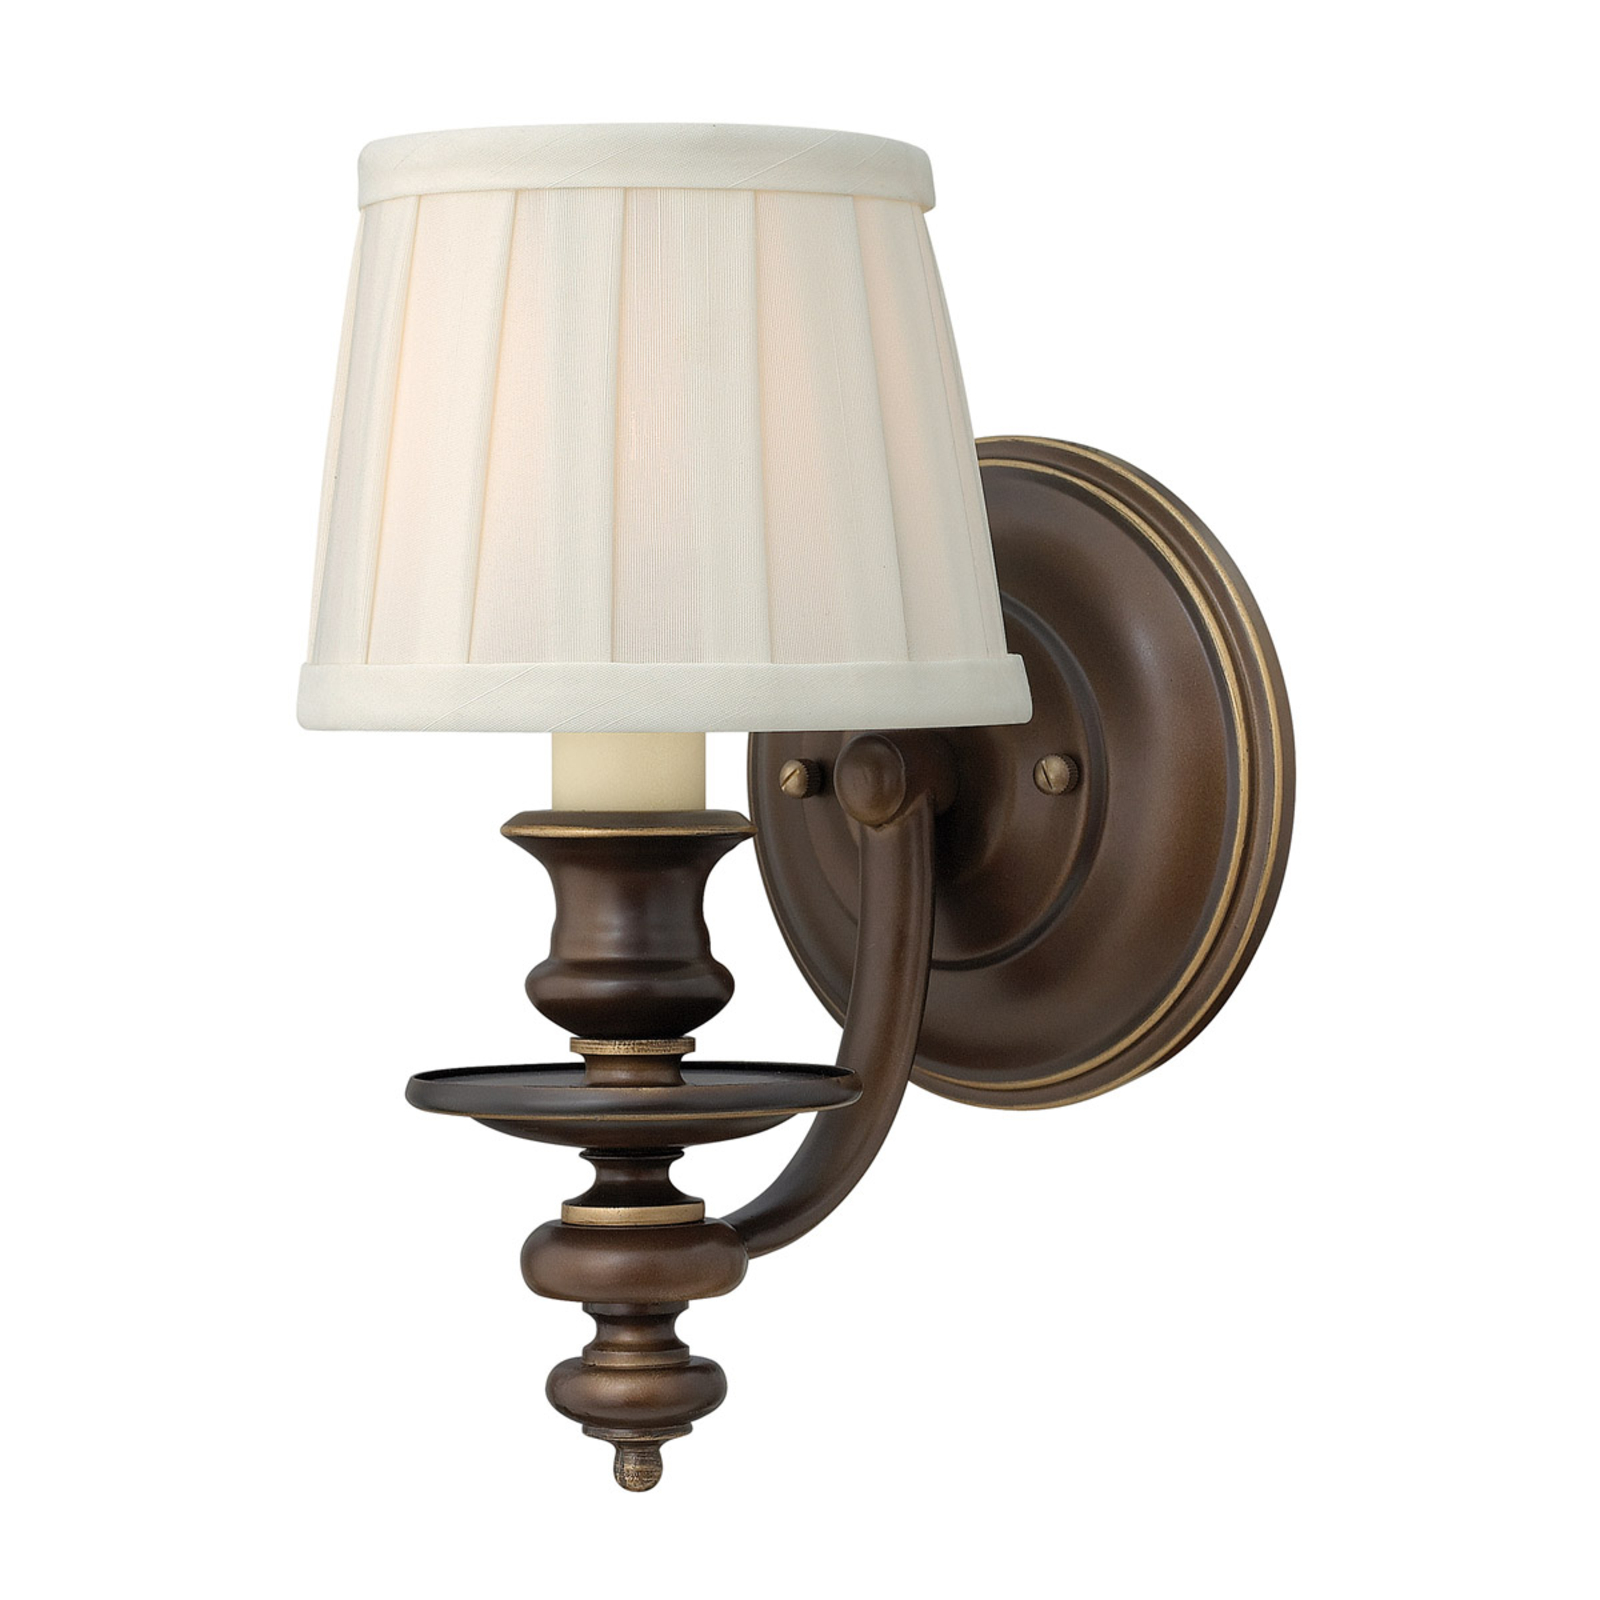 Dunhill fabric wall light with lampshade